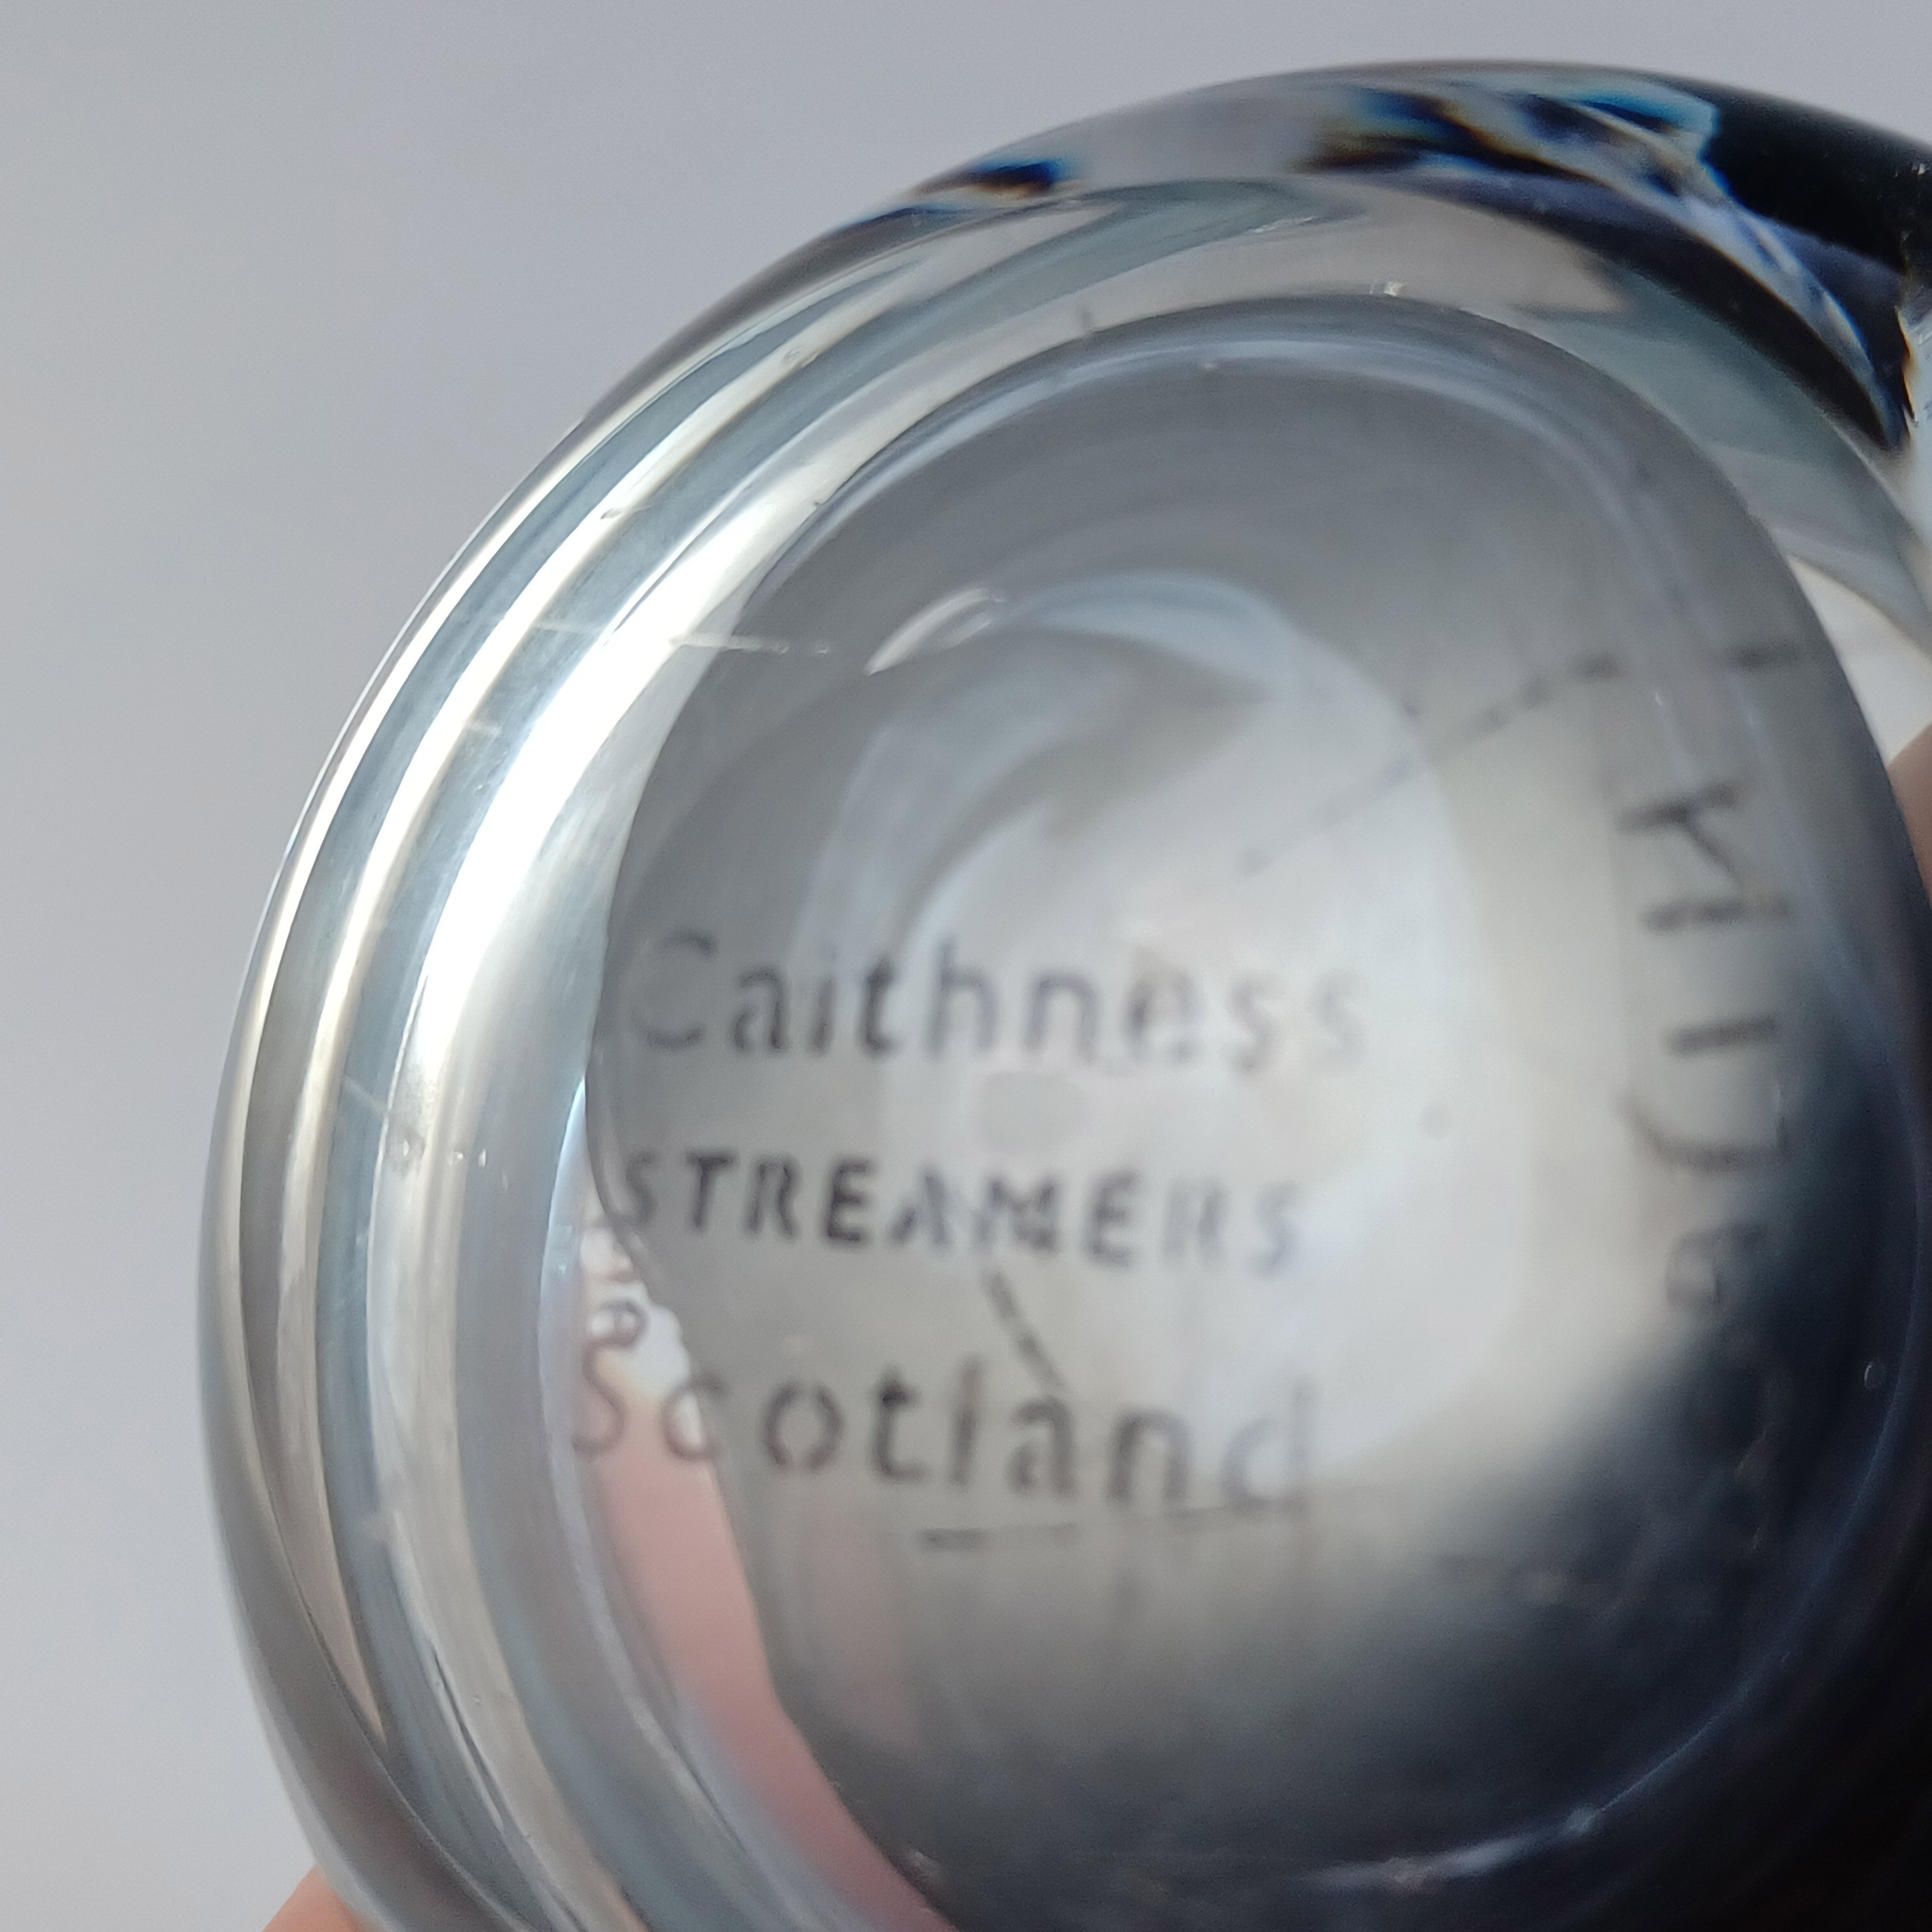 MARKED Caithness Vintage Black & White Glass "Streamers" Paperweight - Click Image to Close